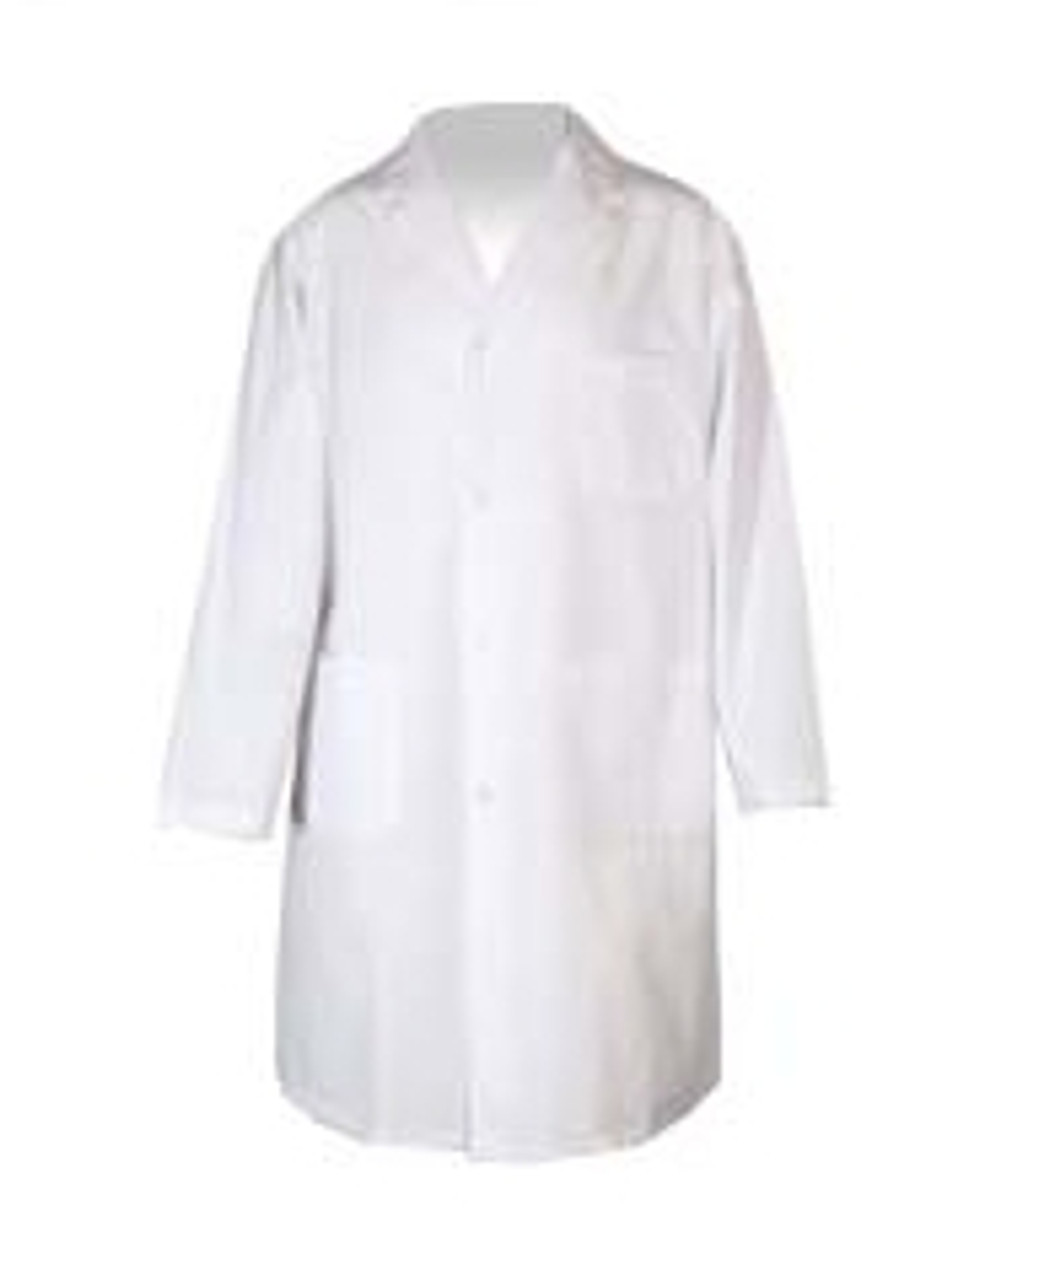 COAT LAB WHITE UNISEX X-LARGE BUTTON STYLE w/3 POCKETS SZ 48-50in (920-70444)